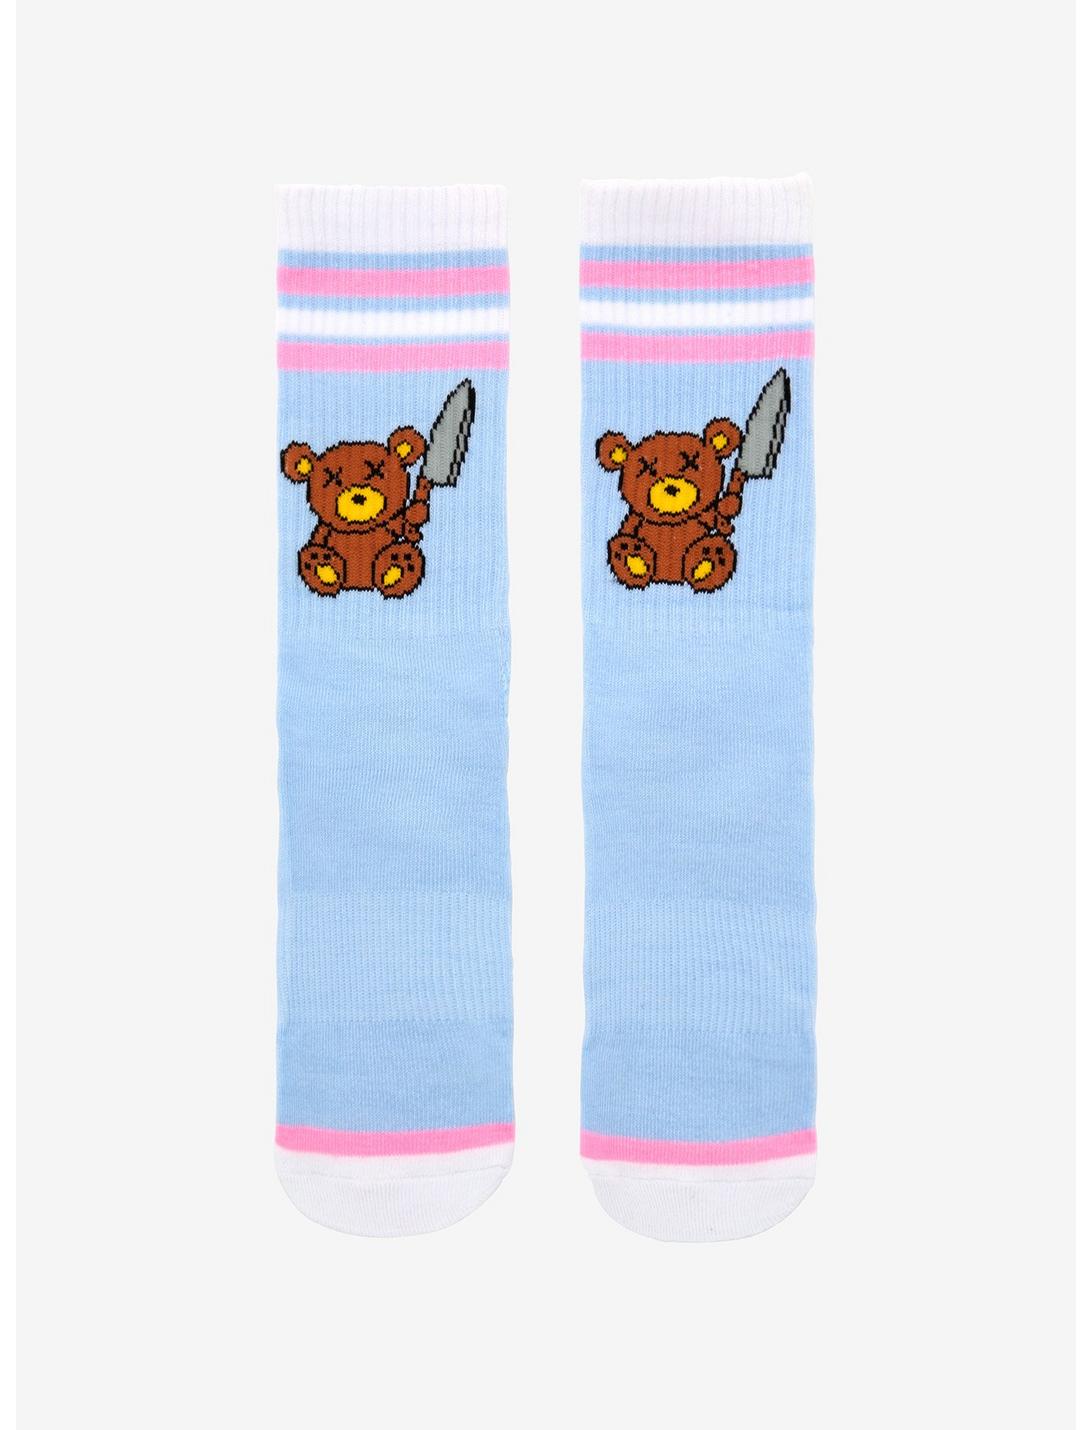 Cute Teddy Bear Crew Socks Soft Ankle Socks Available in 3 Colors  Fast Shipping in the US